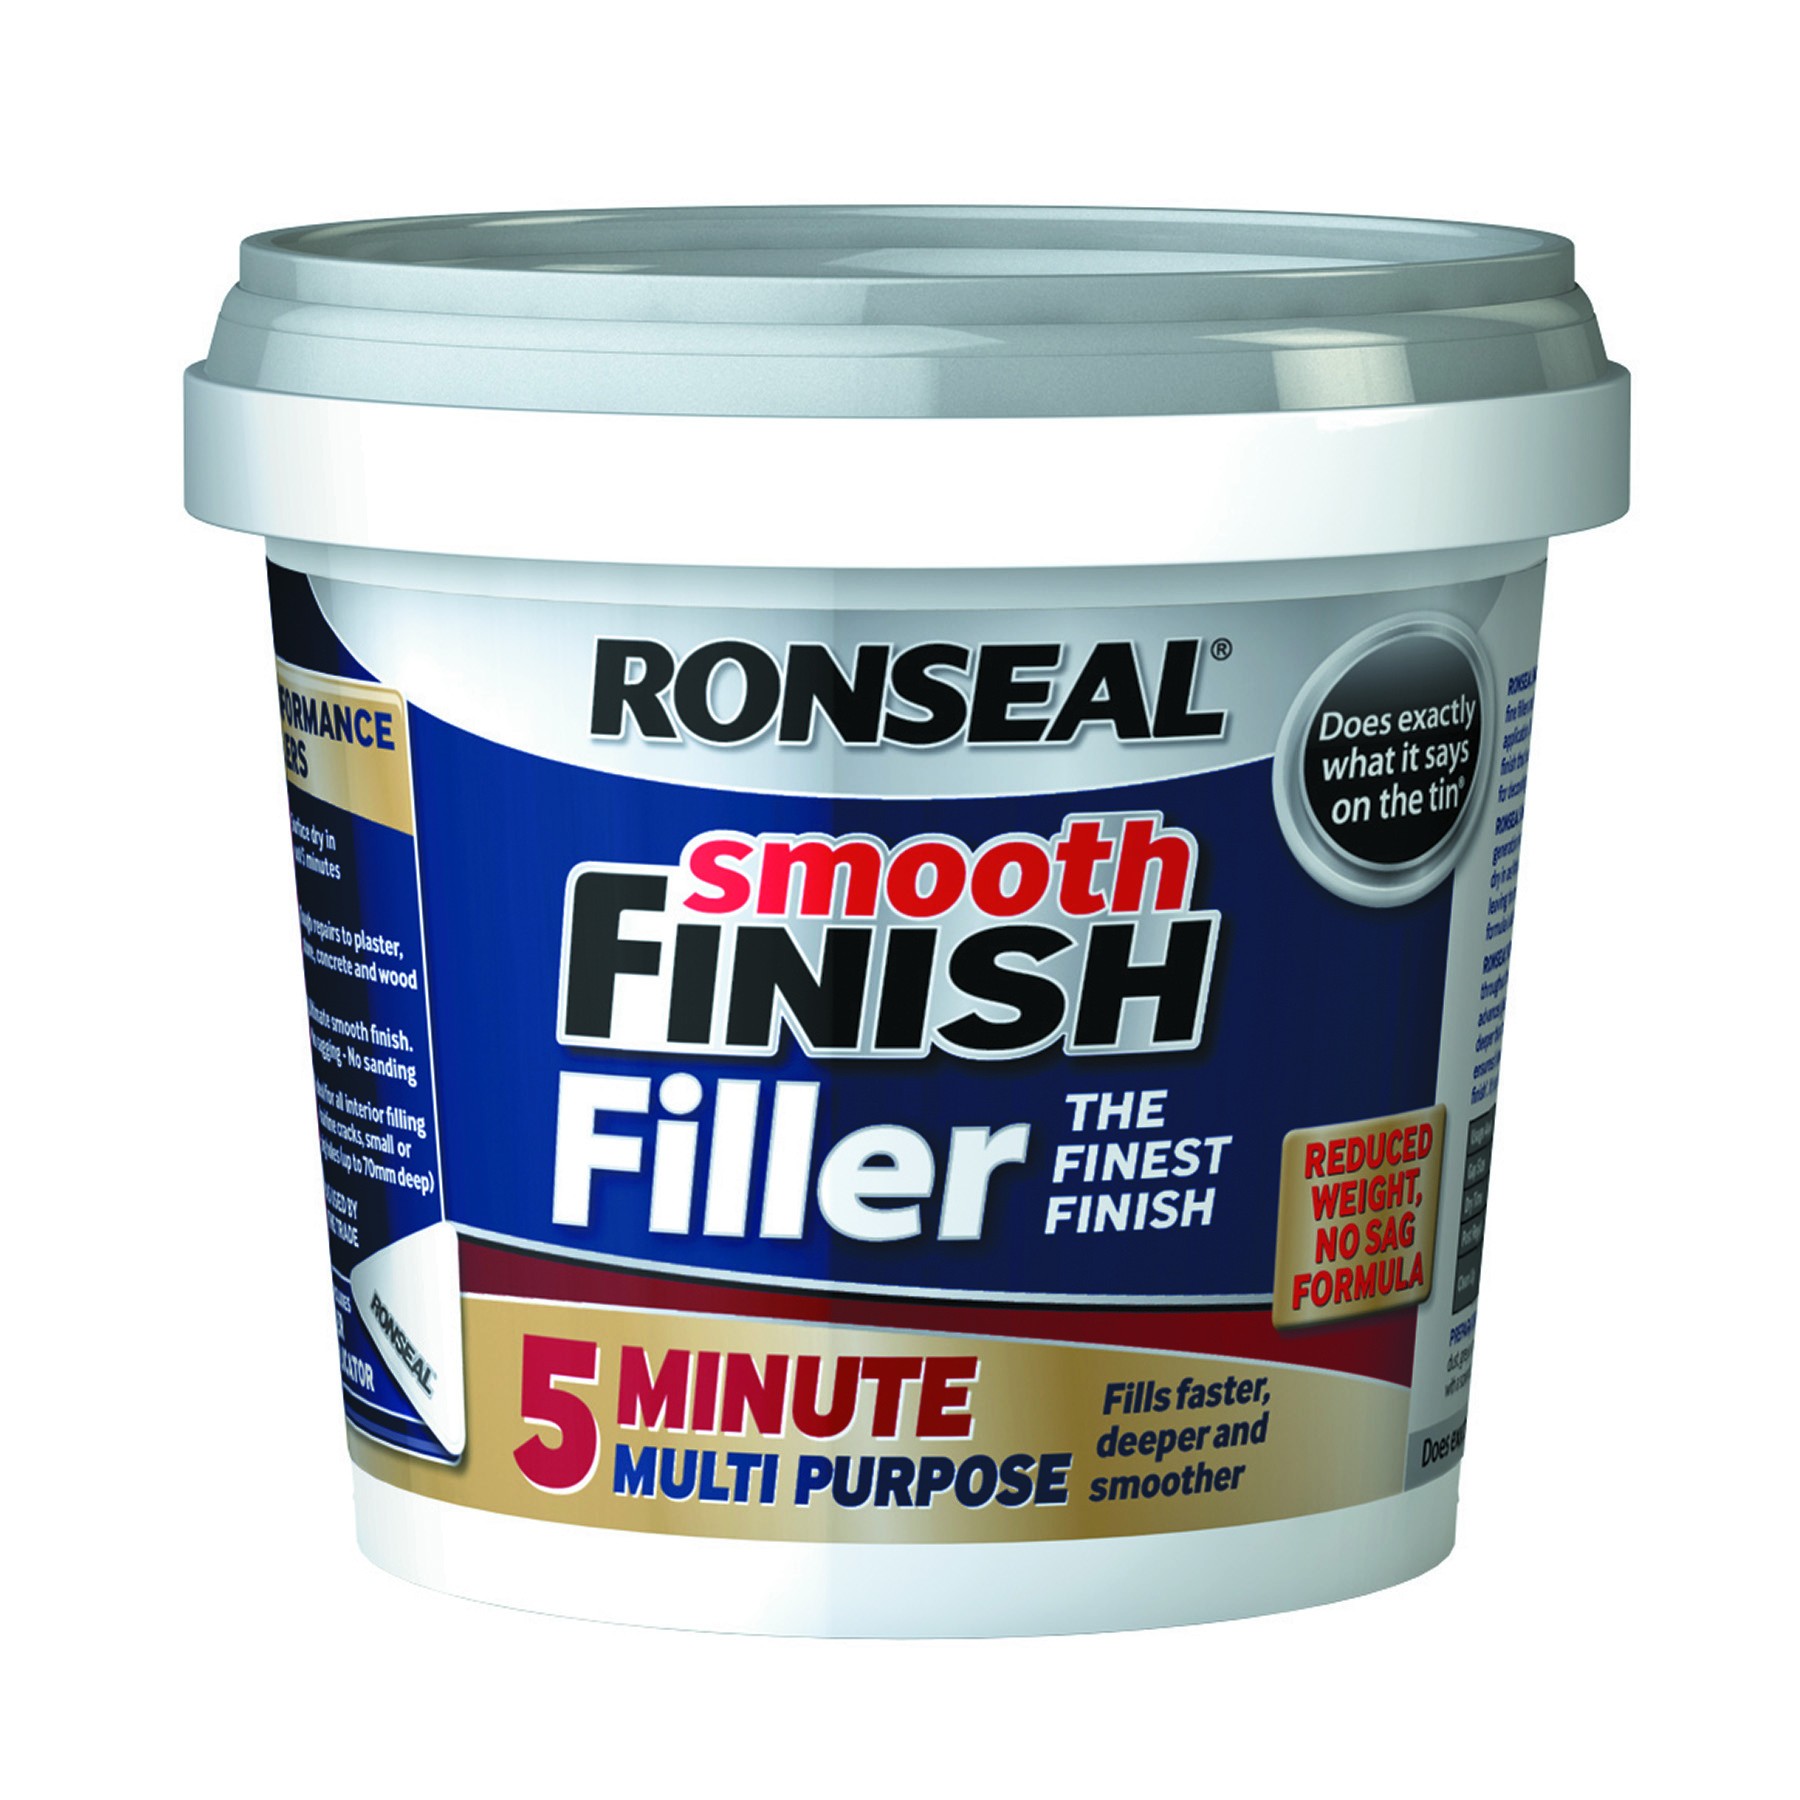 Ronseal Smooth Finish 5 Minute Wall Filler 290ml [RONS36563]